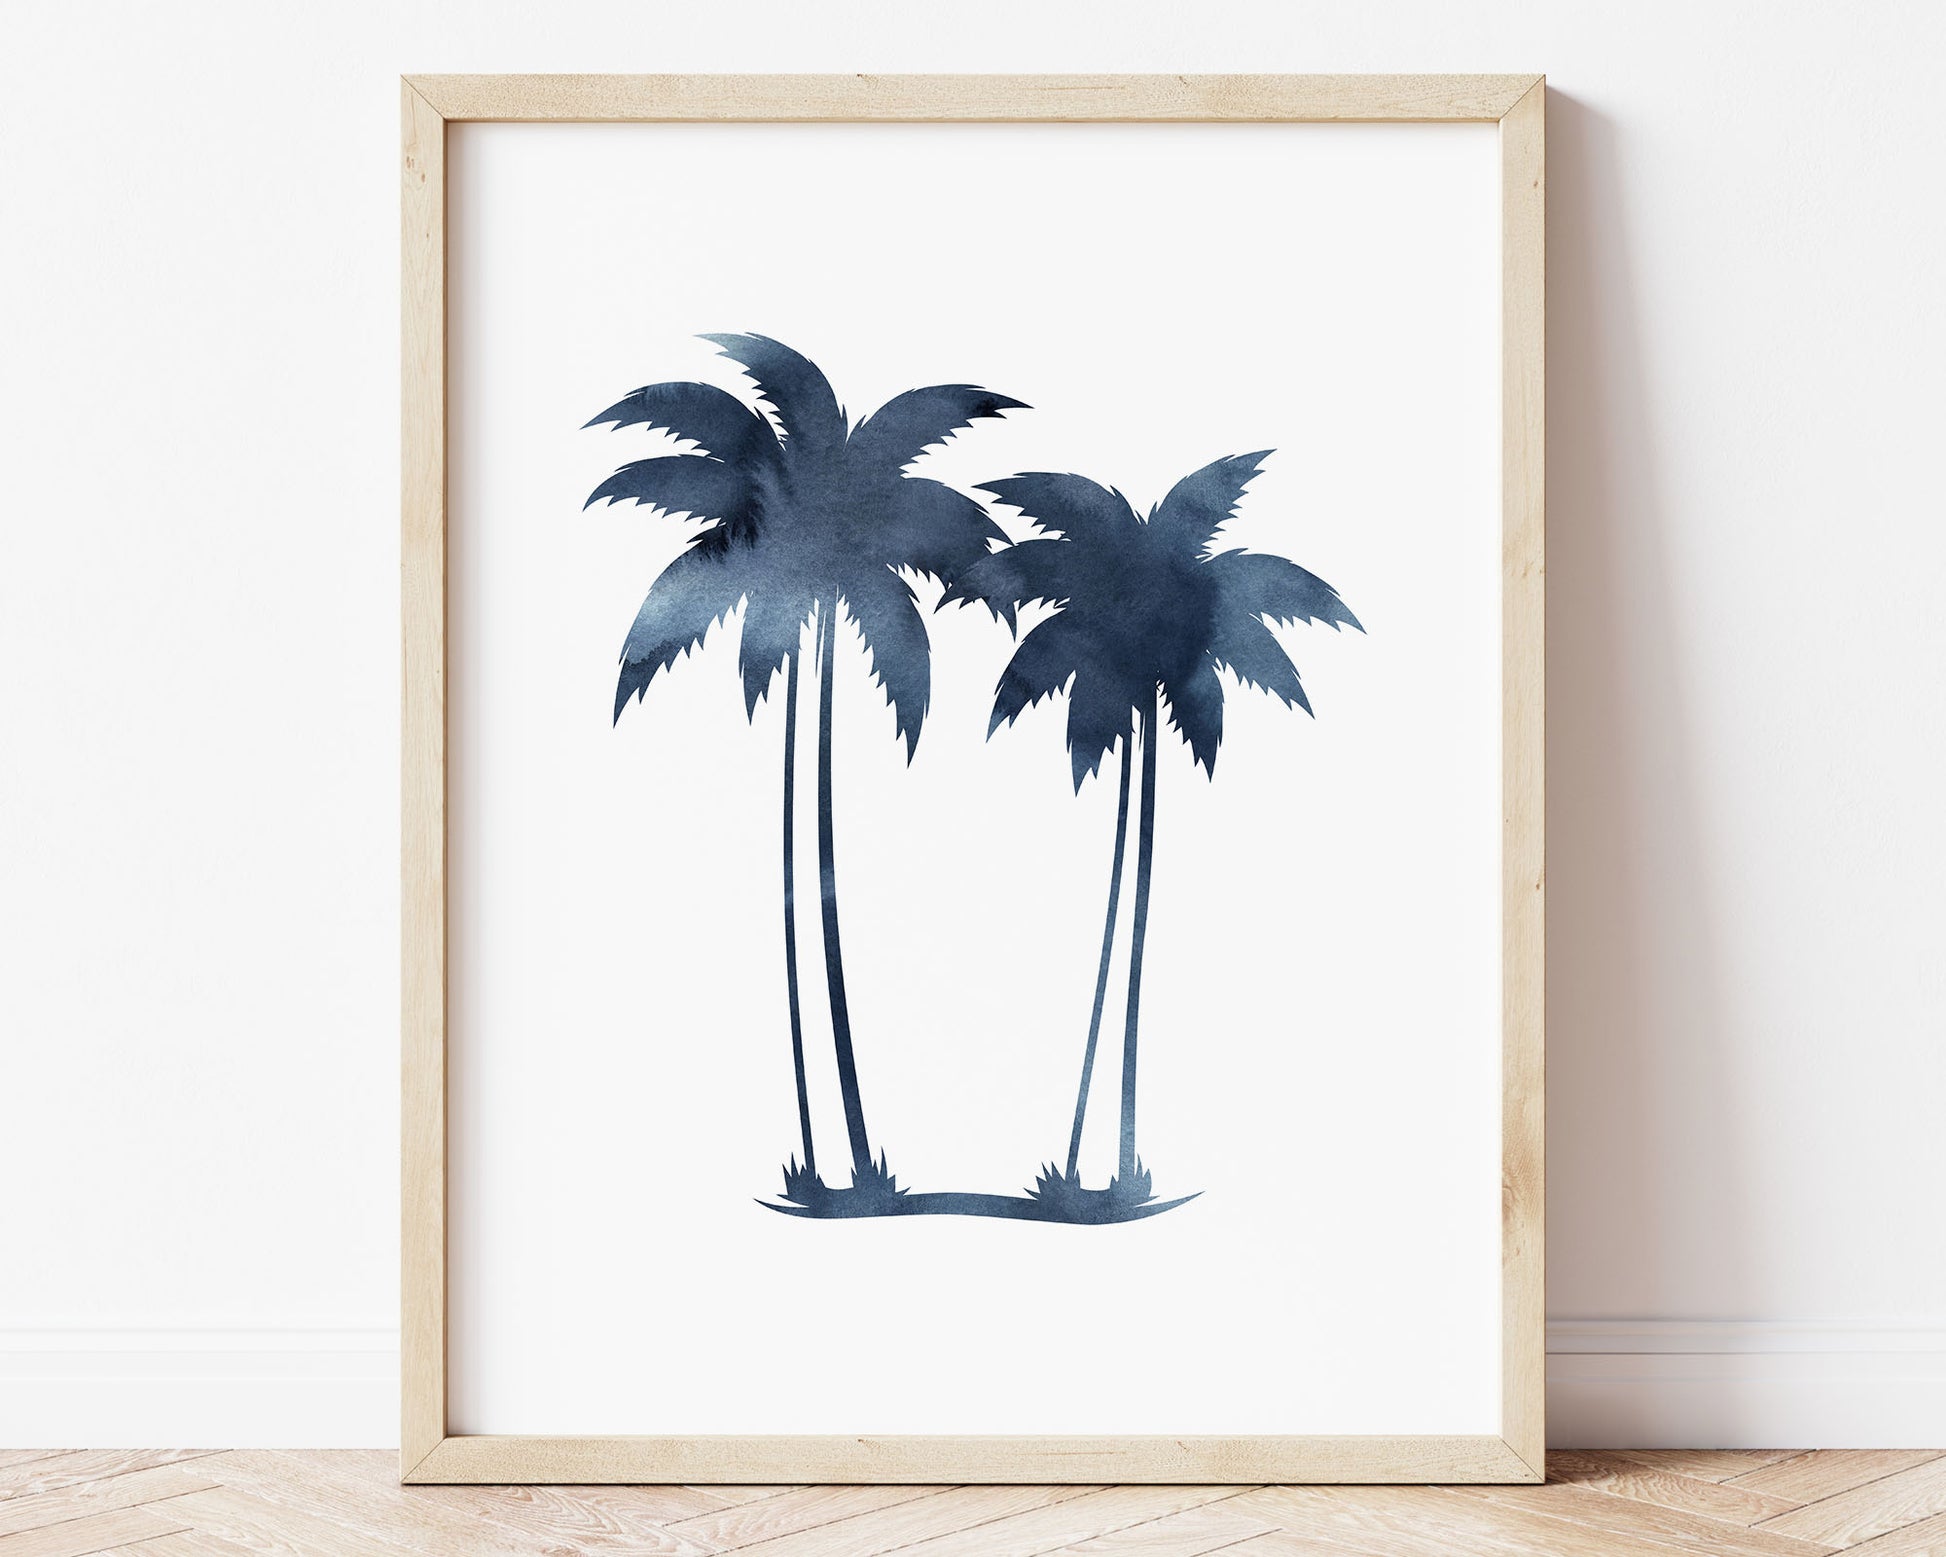 Watercolor Surf Themed Printable Wall Art featuring deep dark navy blue watercolor silhouettes of Palm Trees. Perfect for Baby Boy Surf Nursery Decor, Baby Girl Surfing Nursery Wall Art, Kids Coastal Bedroom Decor, Children's Beach Bathroom Wall Art or Hawaii Poster Playroom Decor.